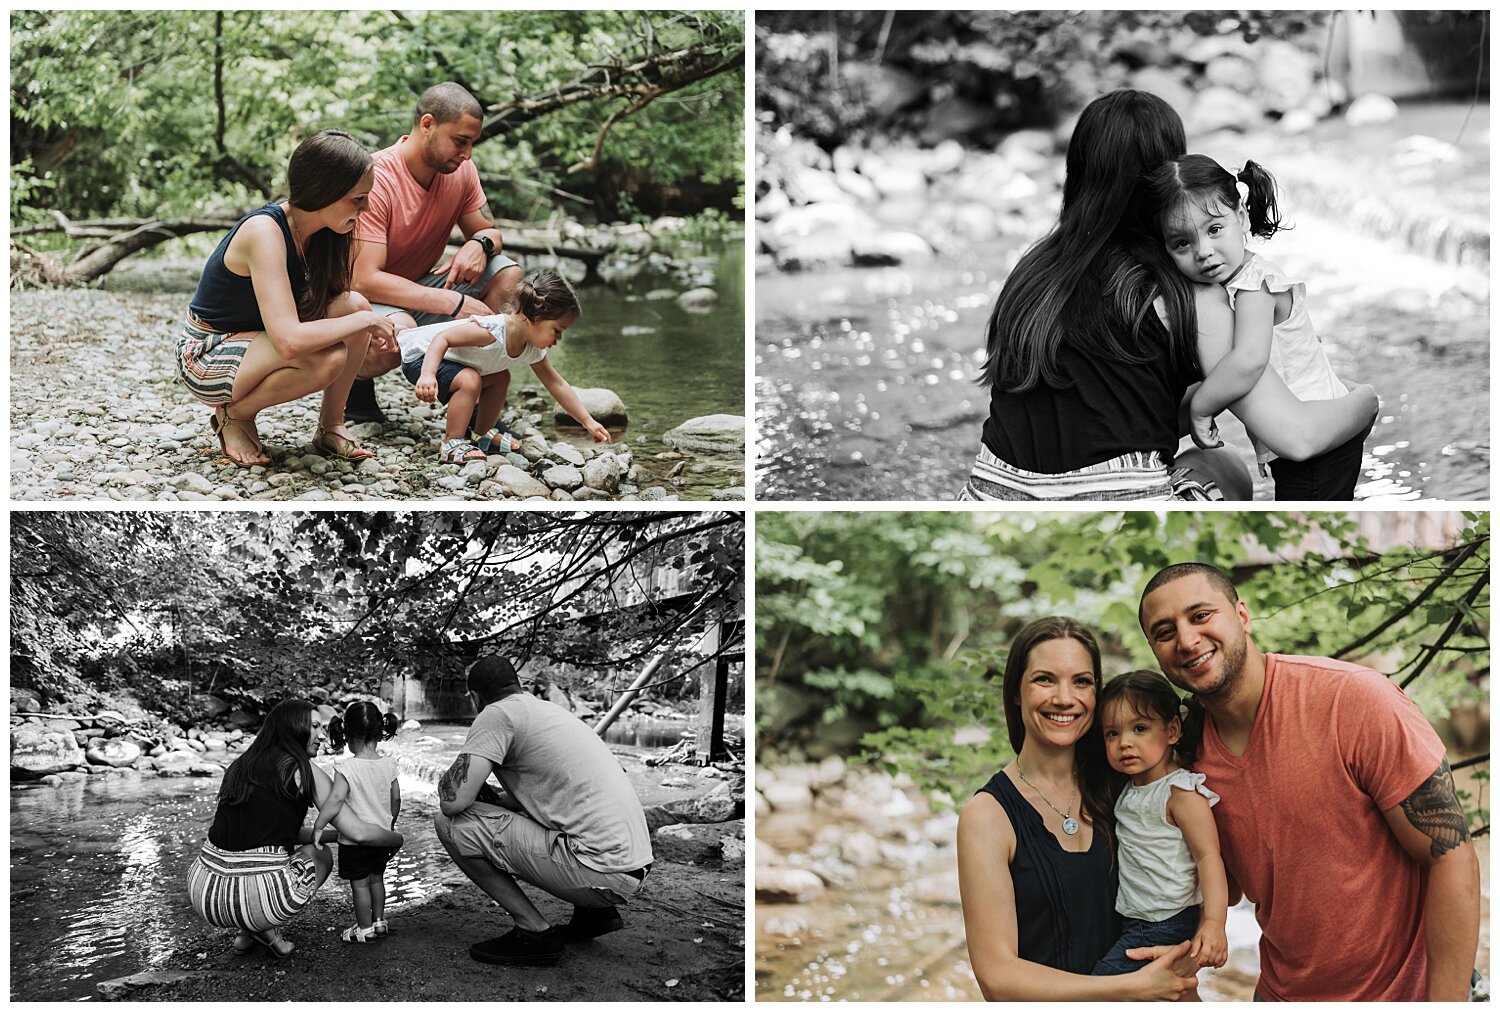 Toronto and Durham Family Lifestyle Photography | Stef & Ramez's Family lifestyle session at Cullen Central Park Gardens_0004.jpg